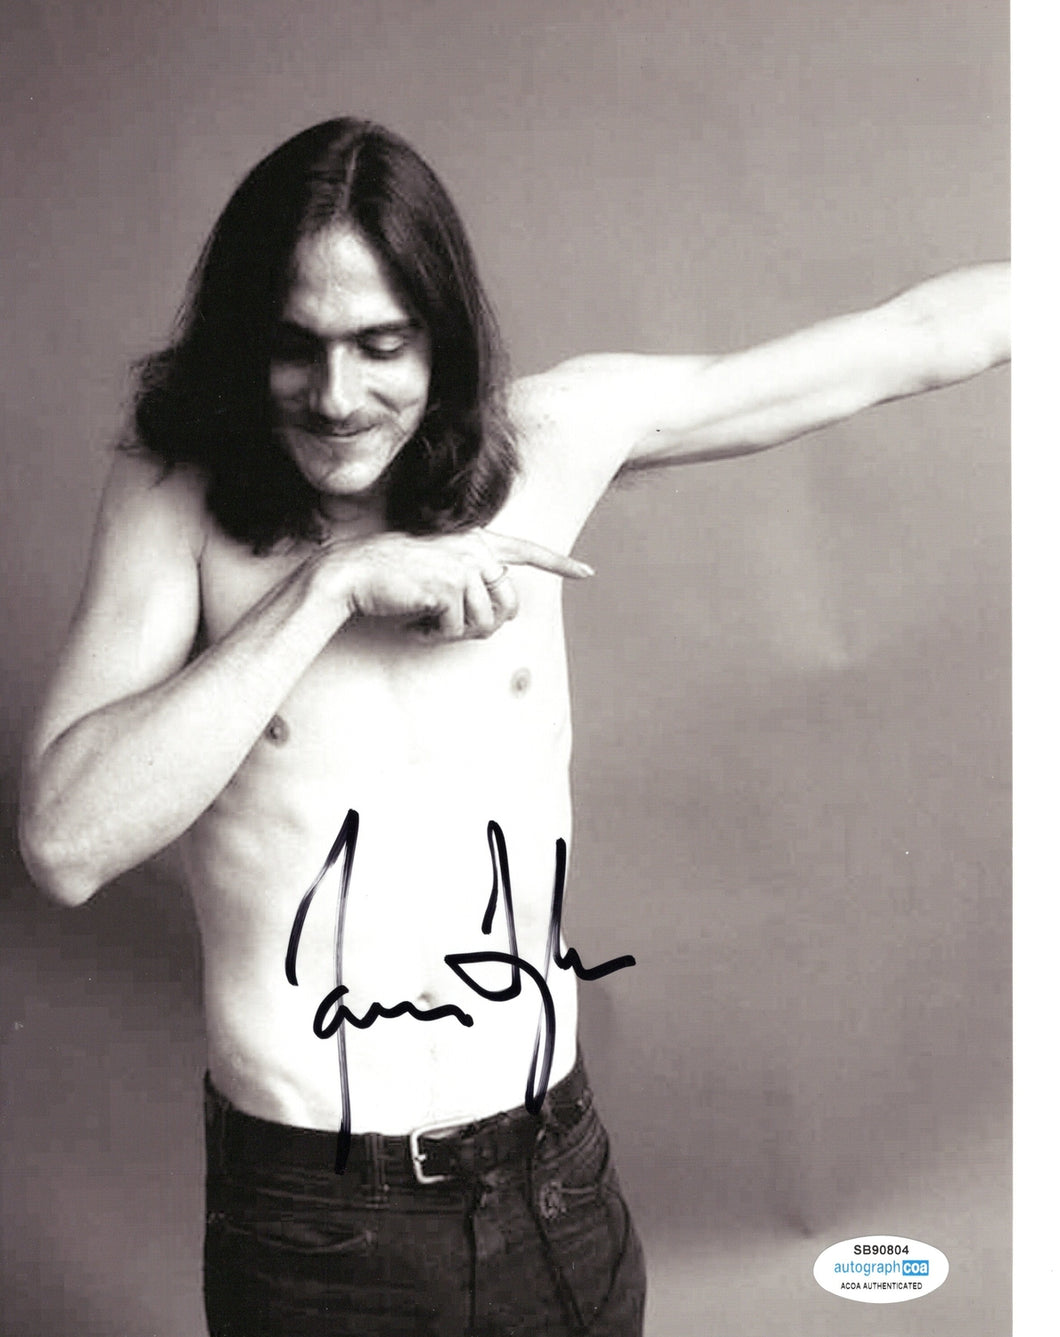 James Taylor Autographed Signed 8x10 Bare Chest b/w Photo